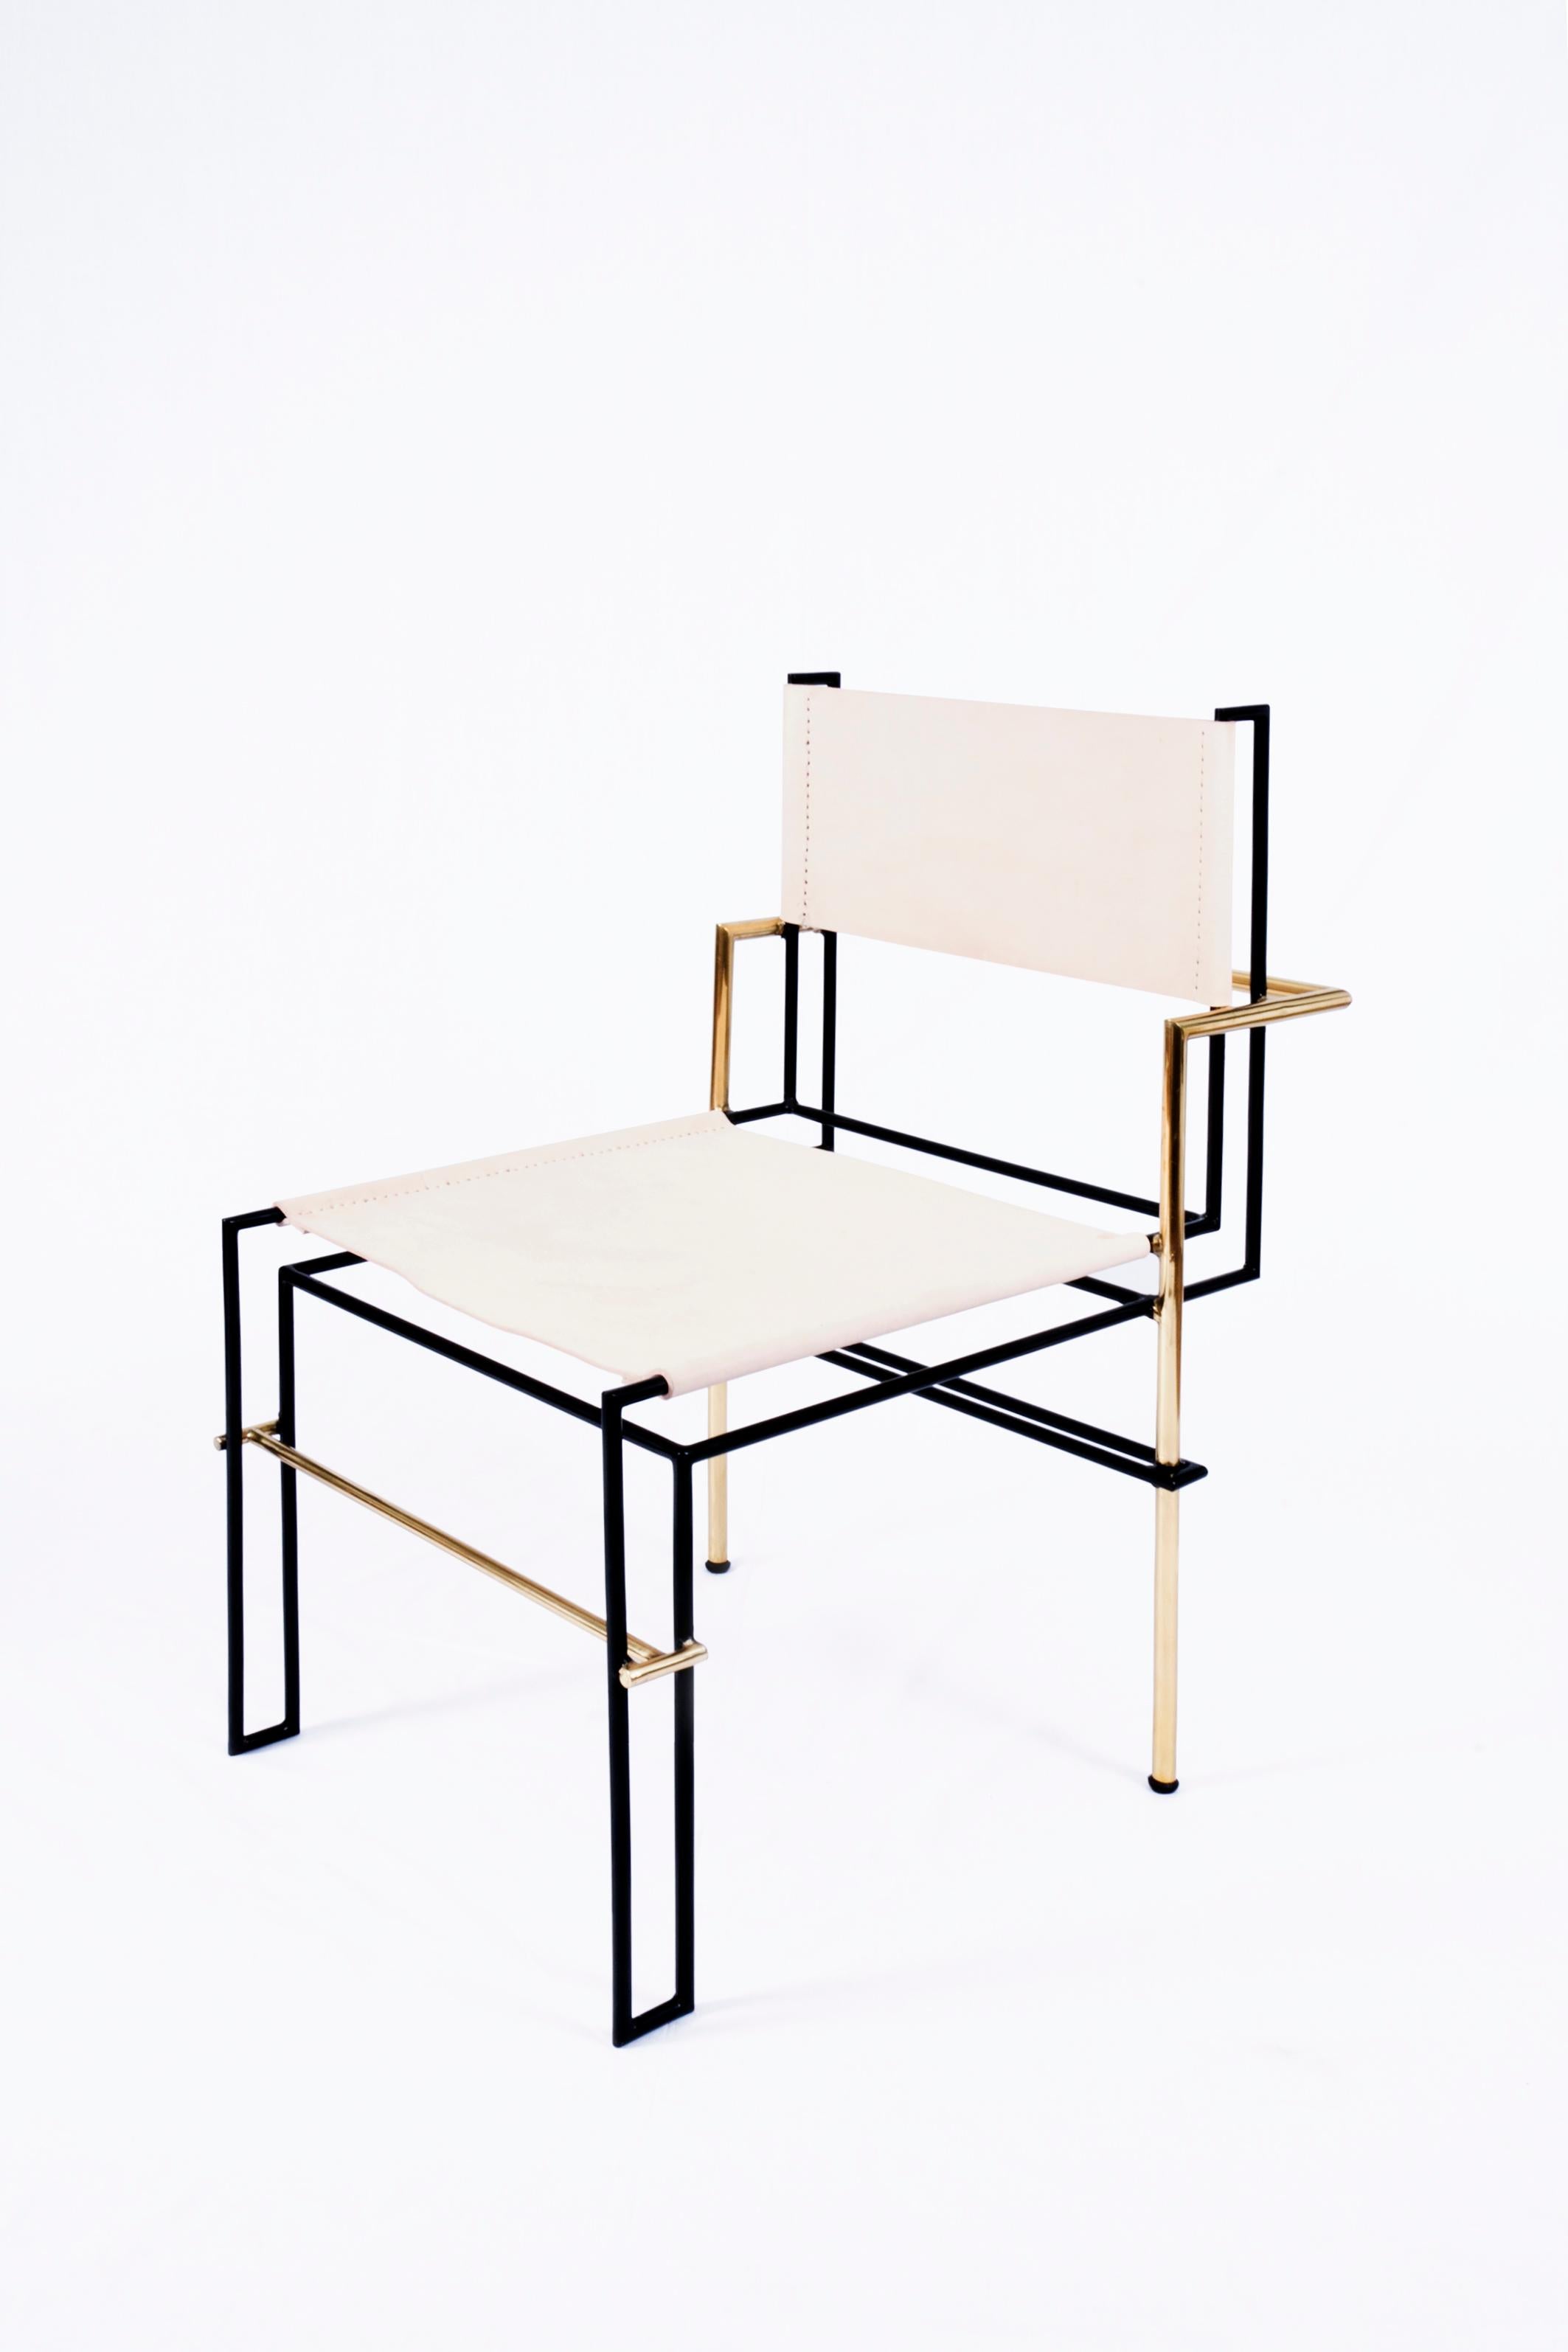 Casbah brass chair black by Nomade Atelier
Dimensions: D94 x W 75 x H107 cm
Material: Brass, leather.
Available in black or White leather. For others finishes,

The Casbah chair, inspired by Laszlo Moholy-Nagy's photograms, is all linear